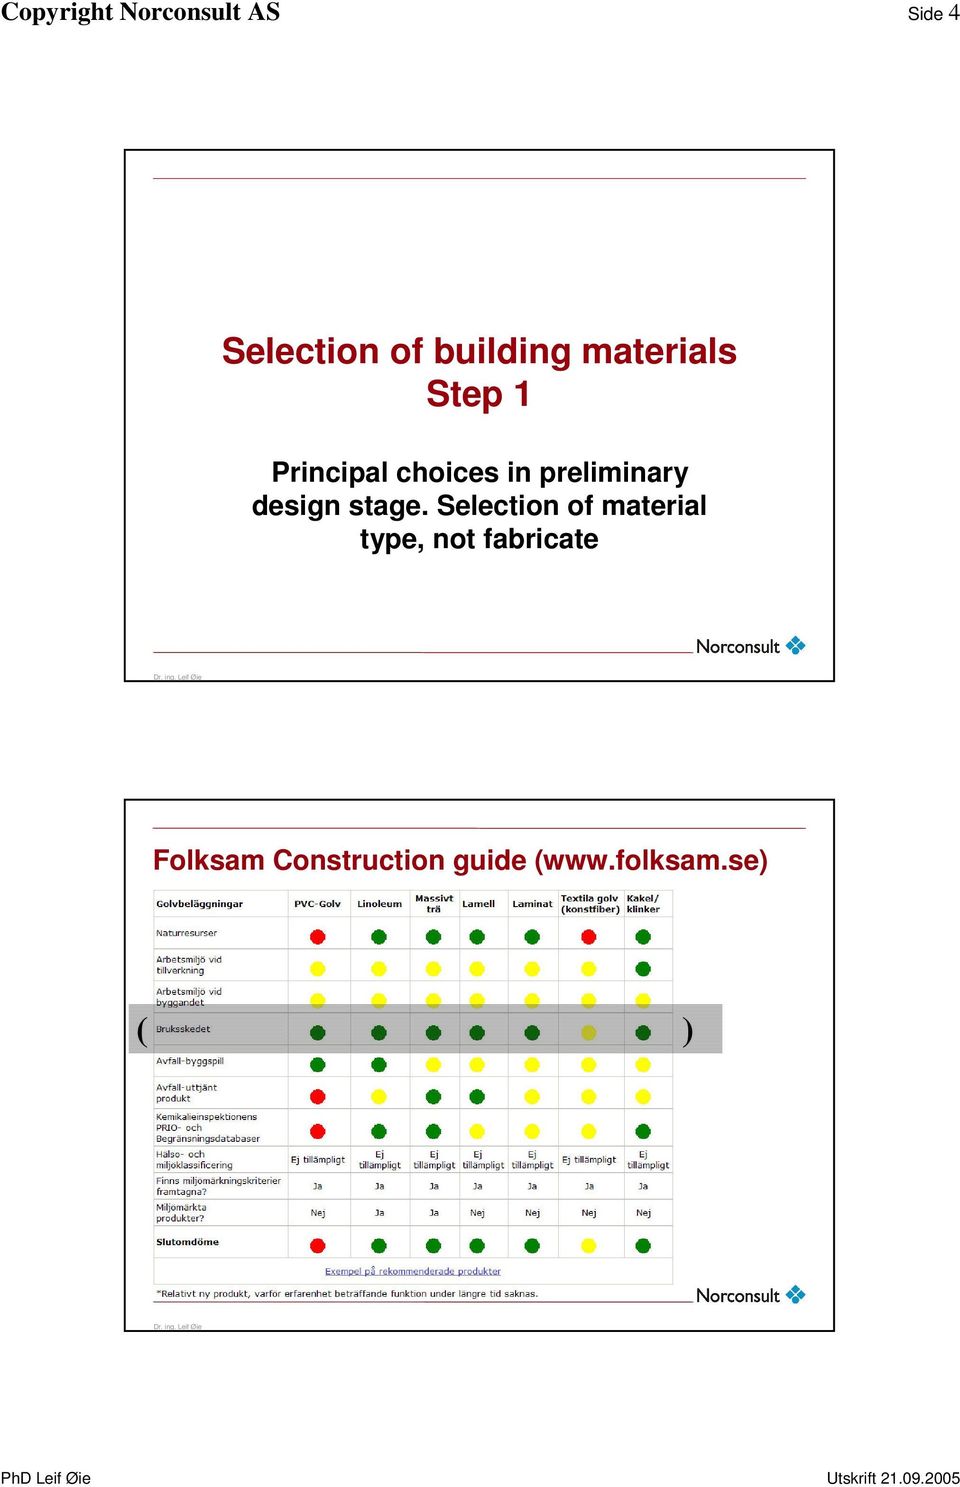 Selection of material type, not fabricate